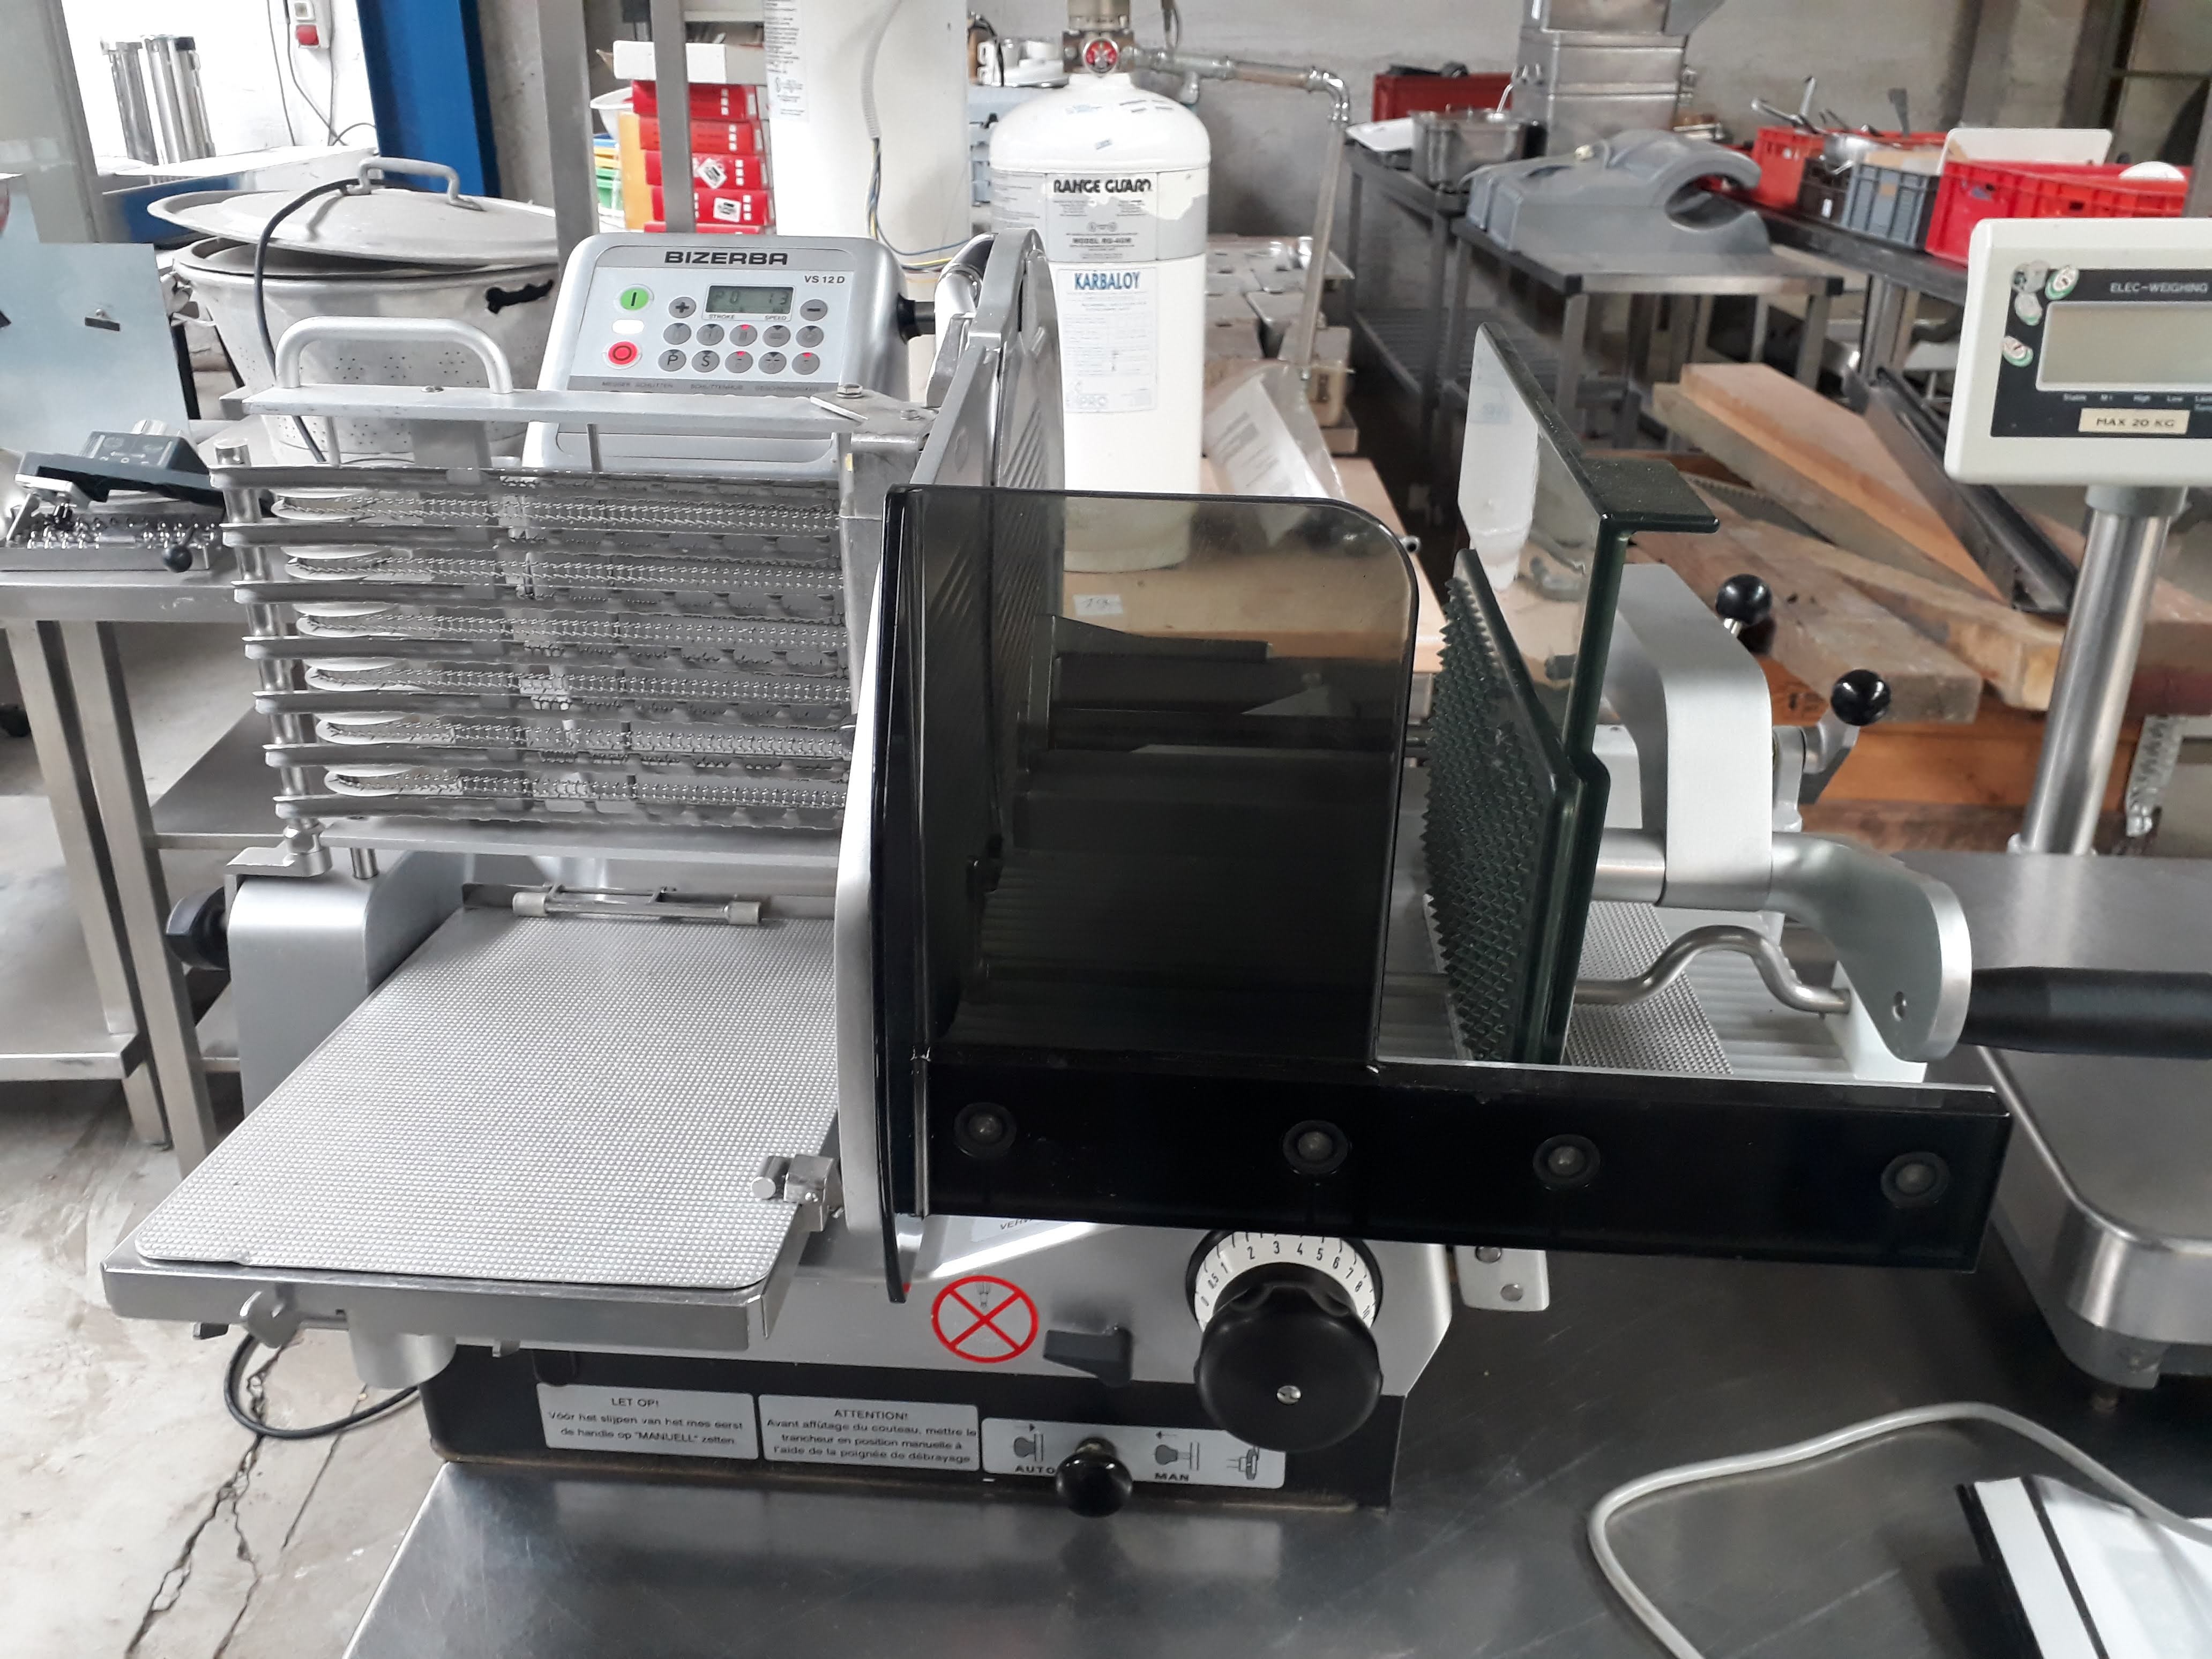 BIZERBA GSP HD 33 Automatic Slicer & Face to Face Mobile #angi93 